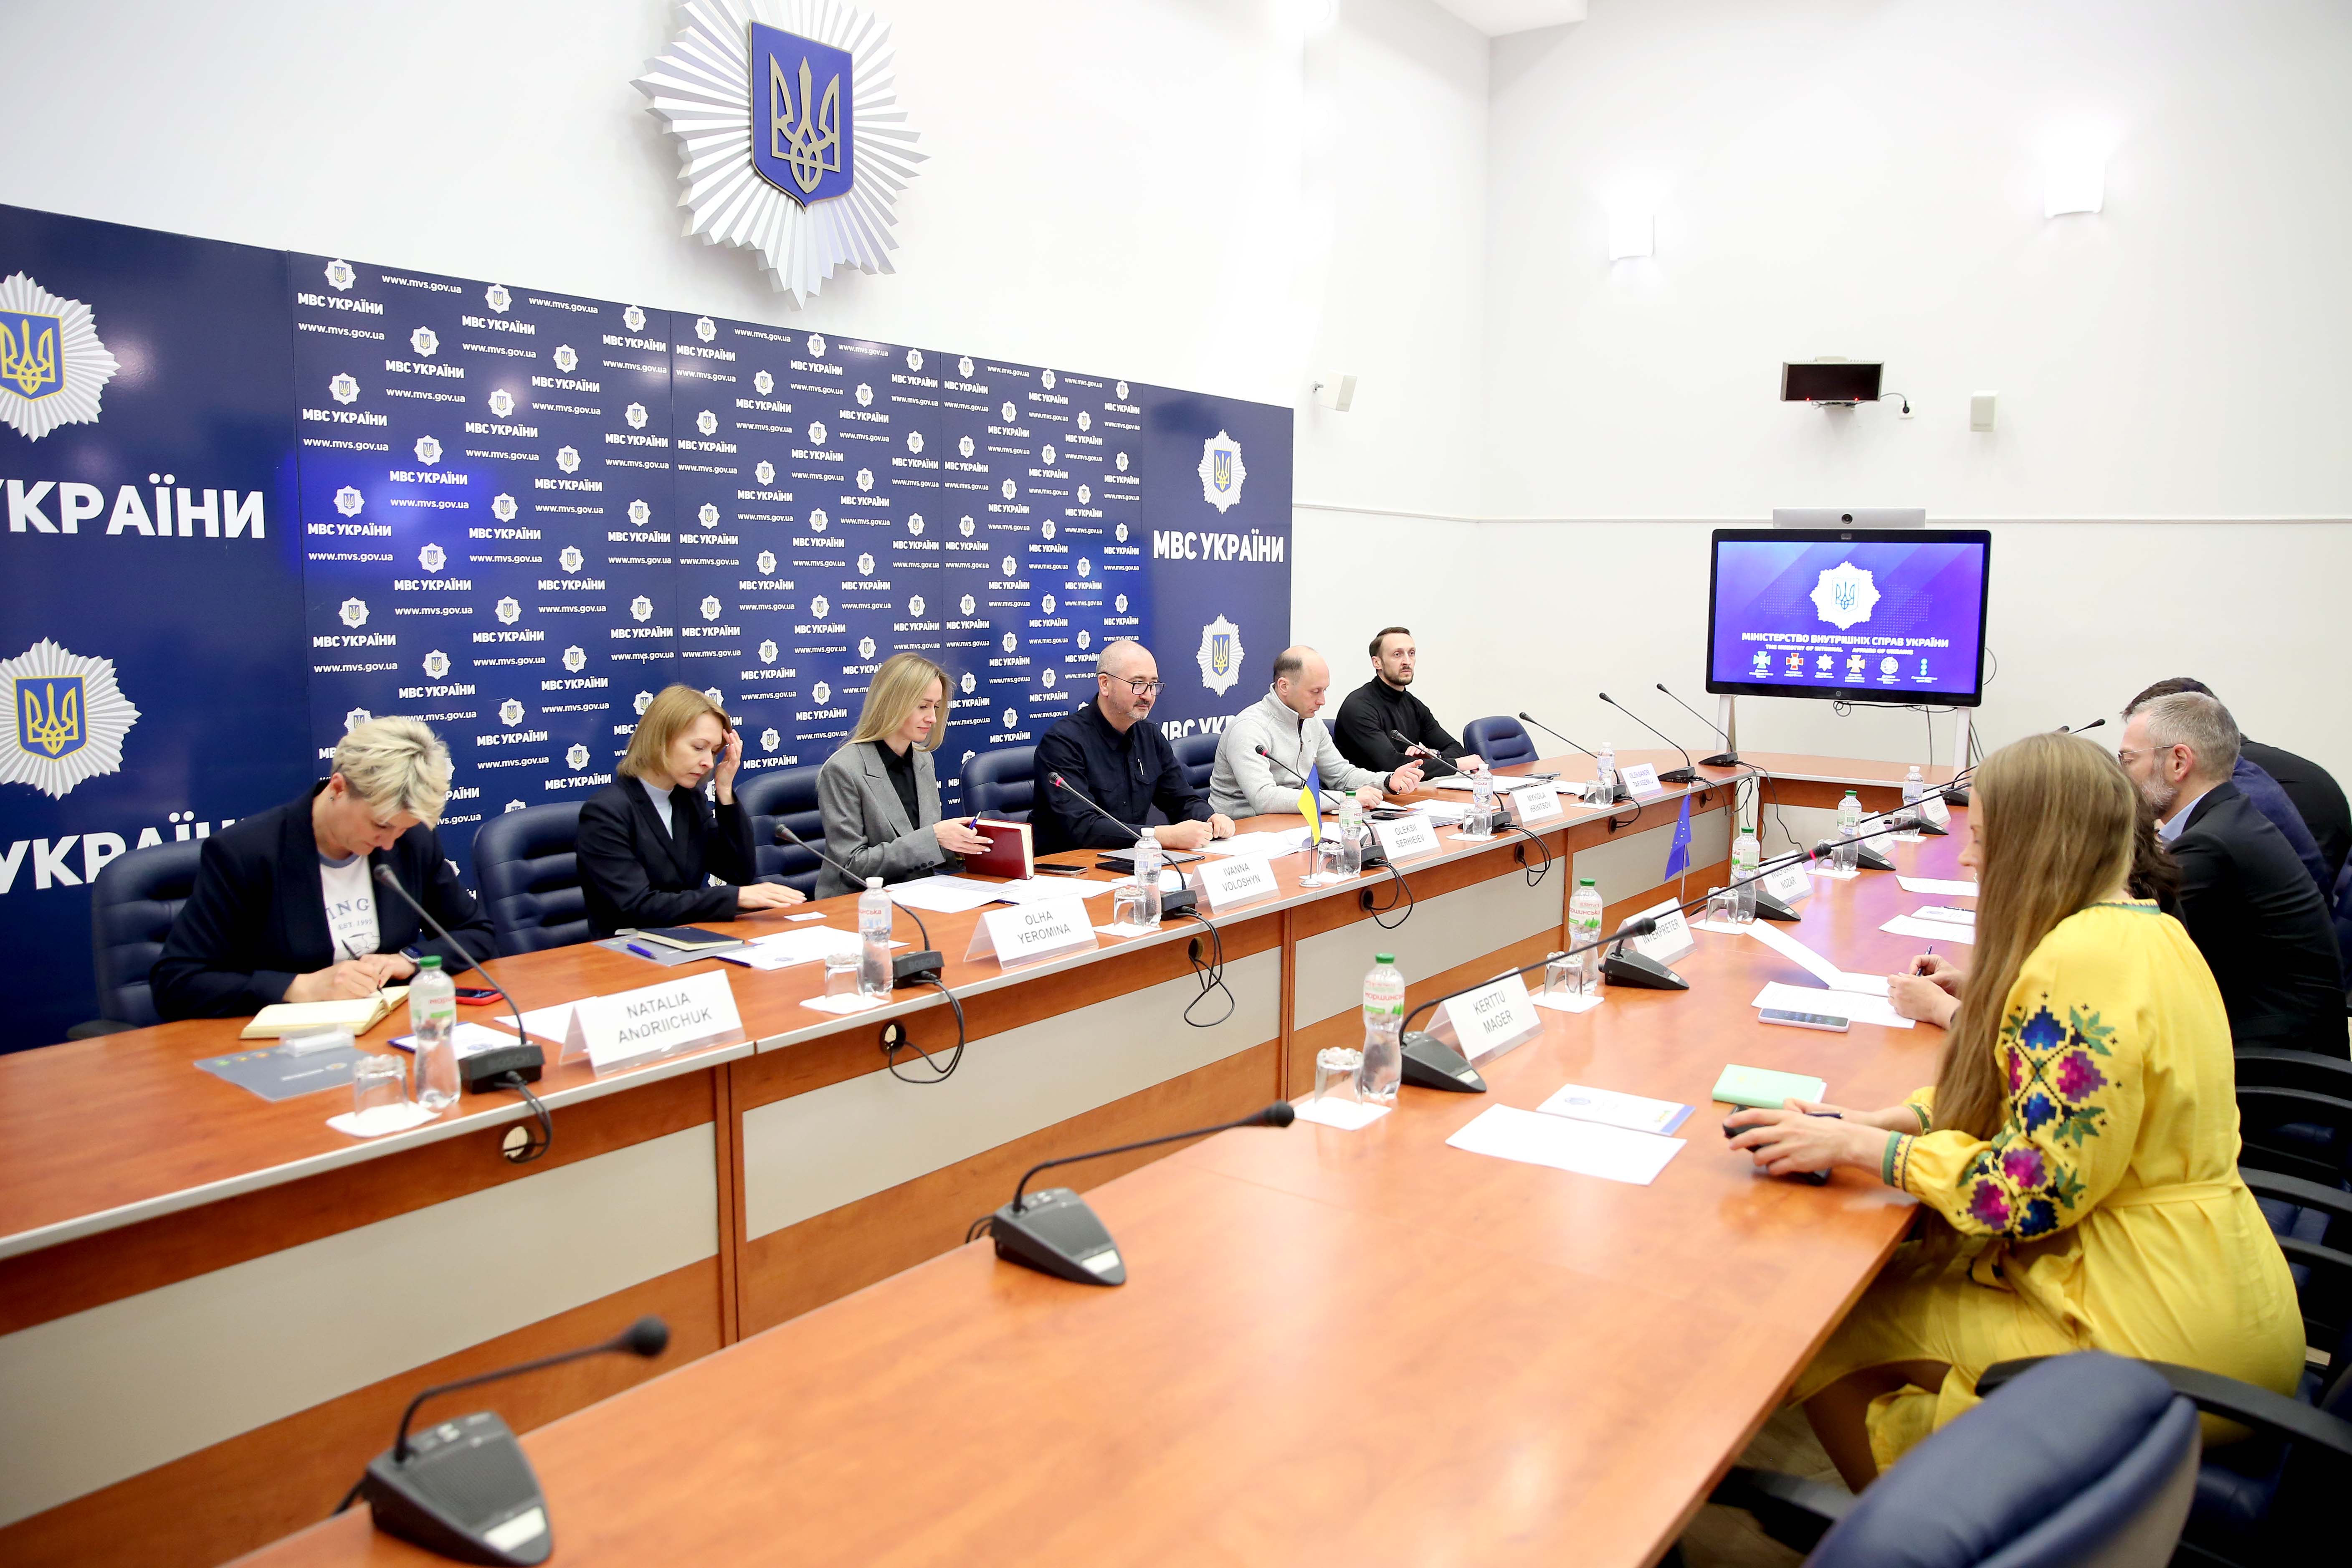 The Ministry of Internal Affairs held a working meeting with representatives of the European Commission